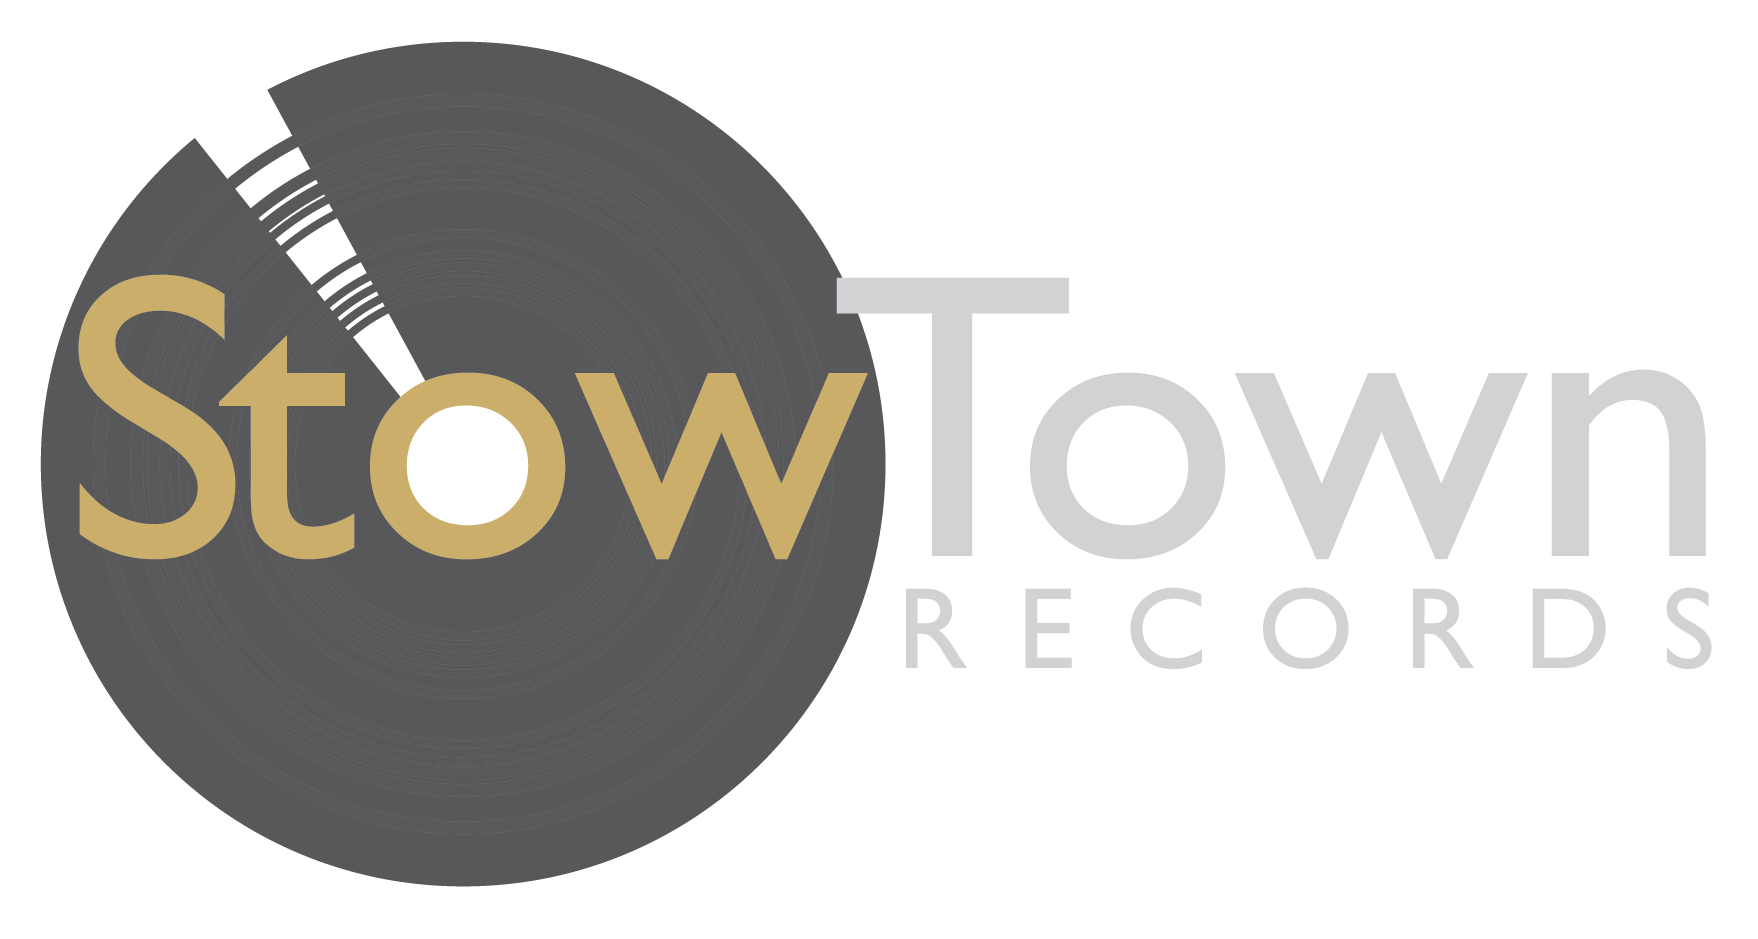 StowTown Records